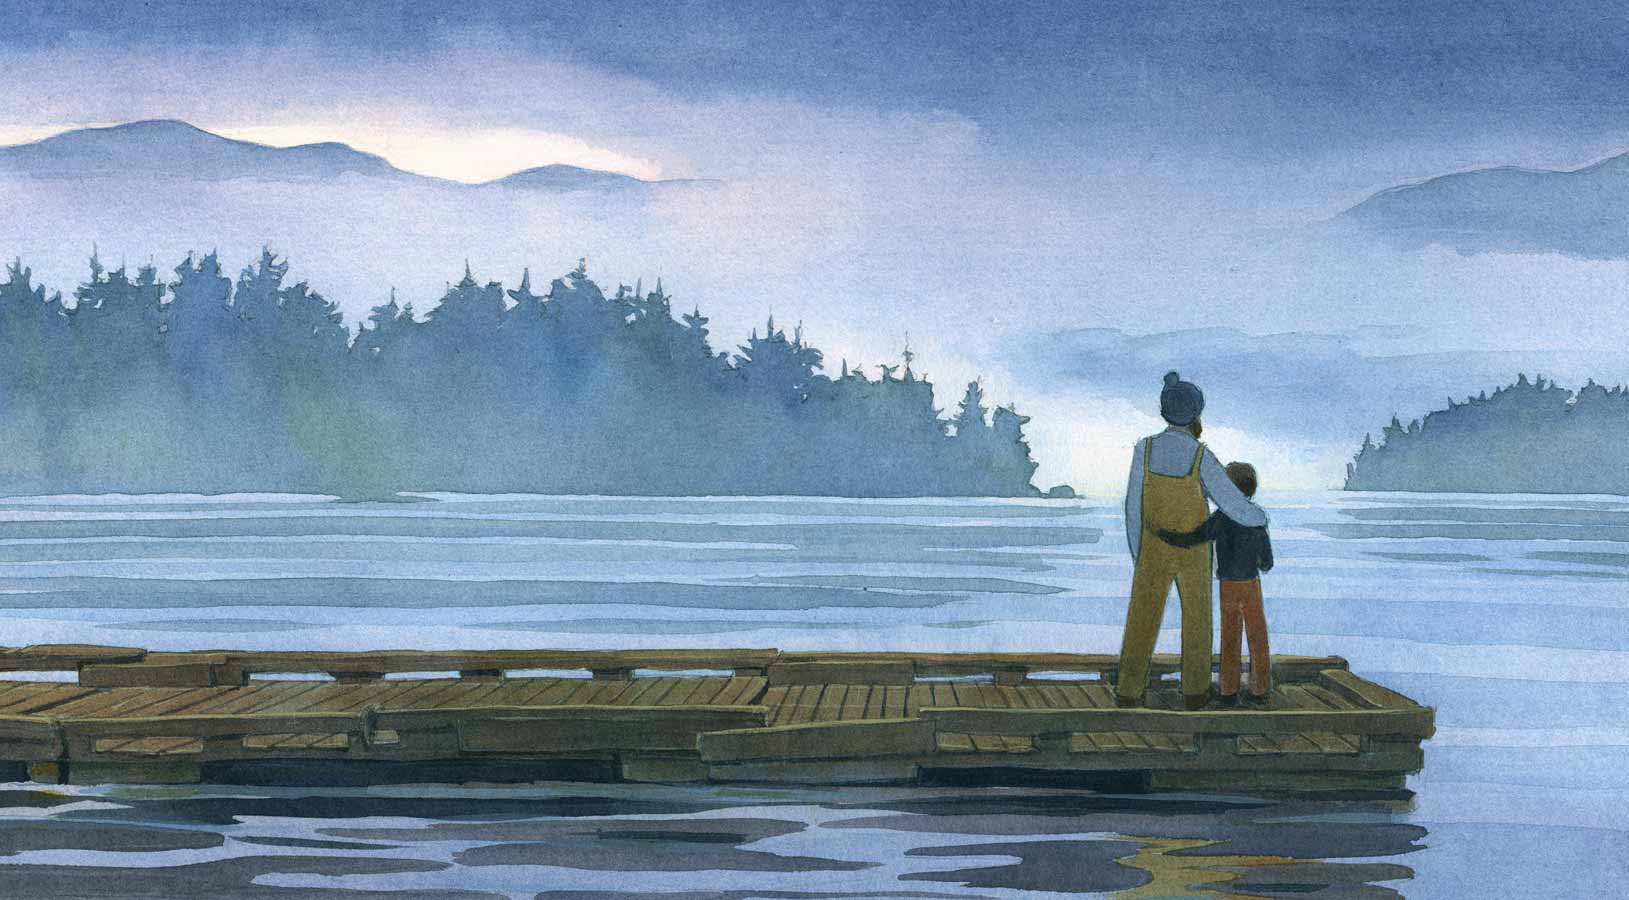 Watercolor illustration from 'The Fisherman and the Whale' showing a father and son standing at the end of a small dock looking out at water and islands and mountains partially hidden by mist.